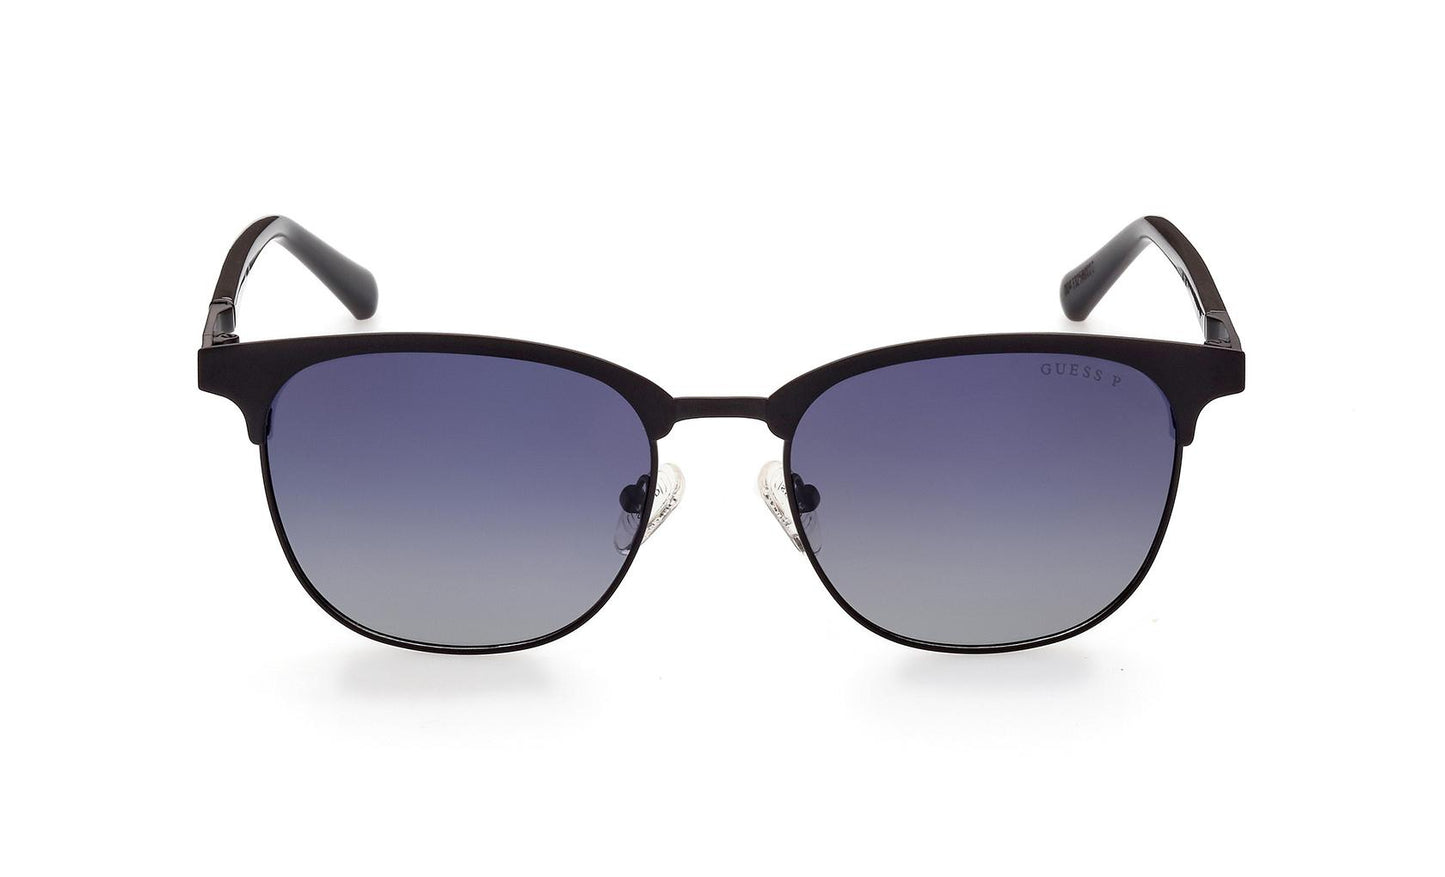 Load image into Gallery viewer, Guess Sunglasses GU00052 02D
